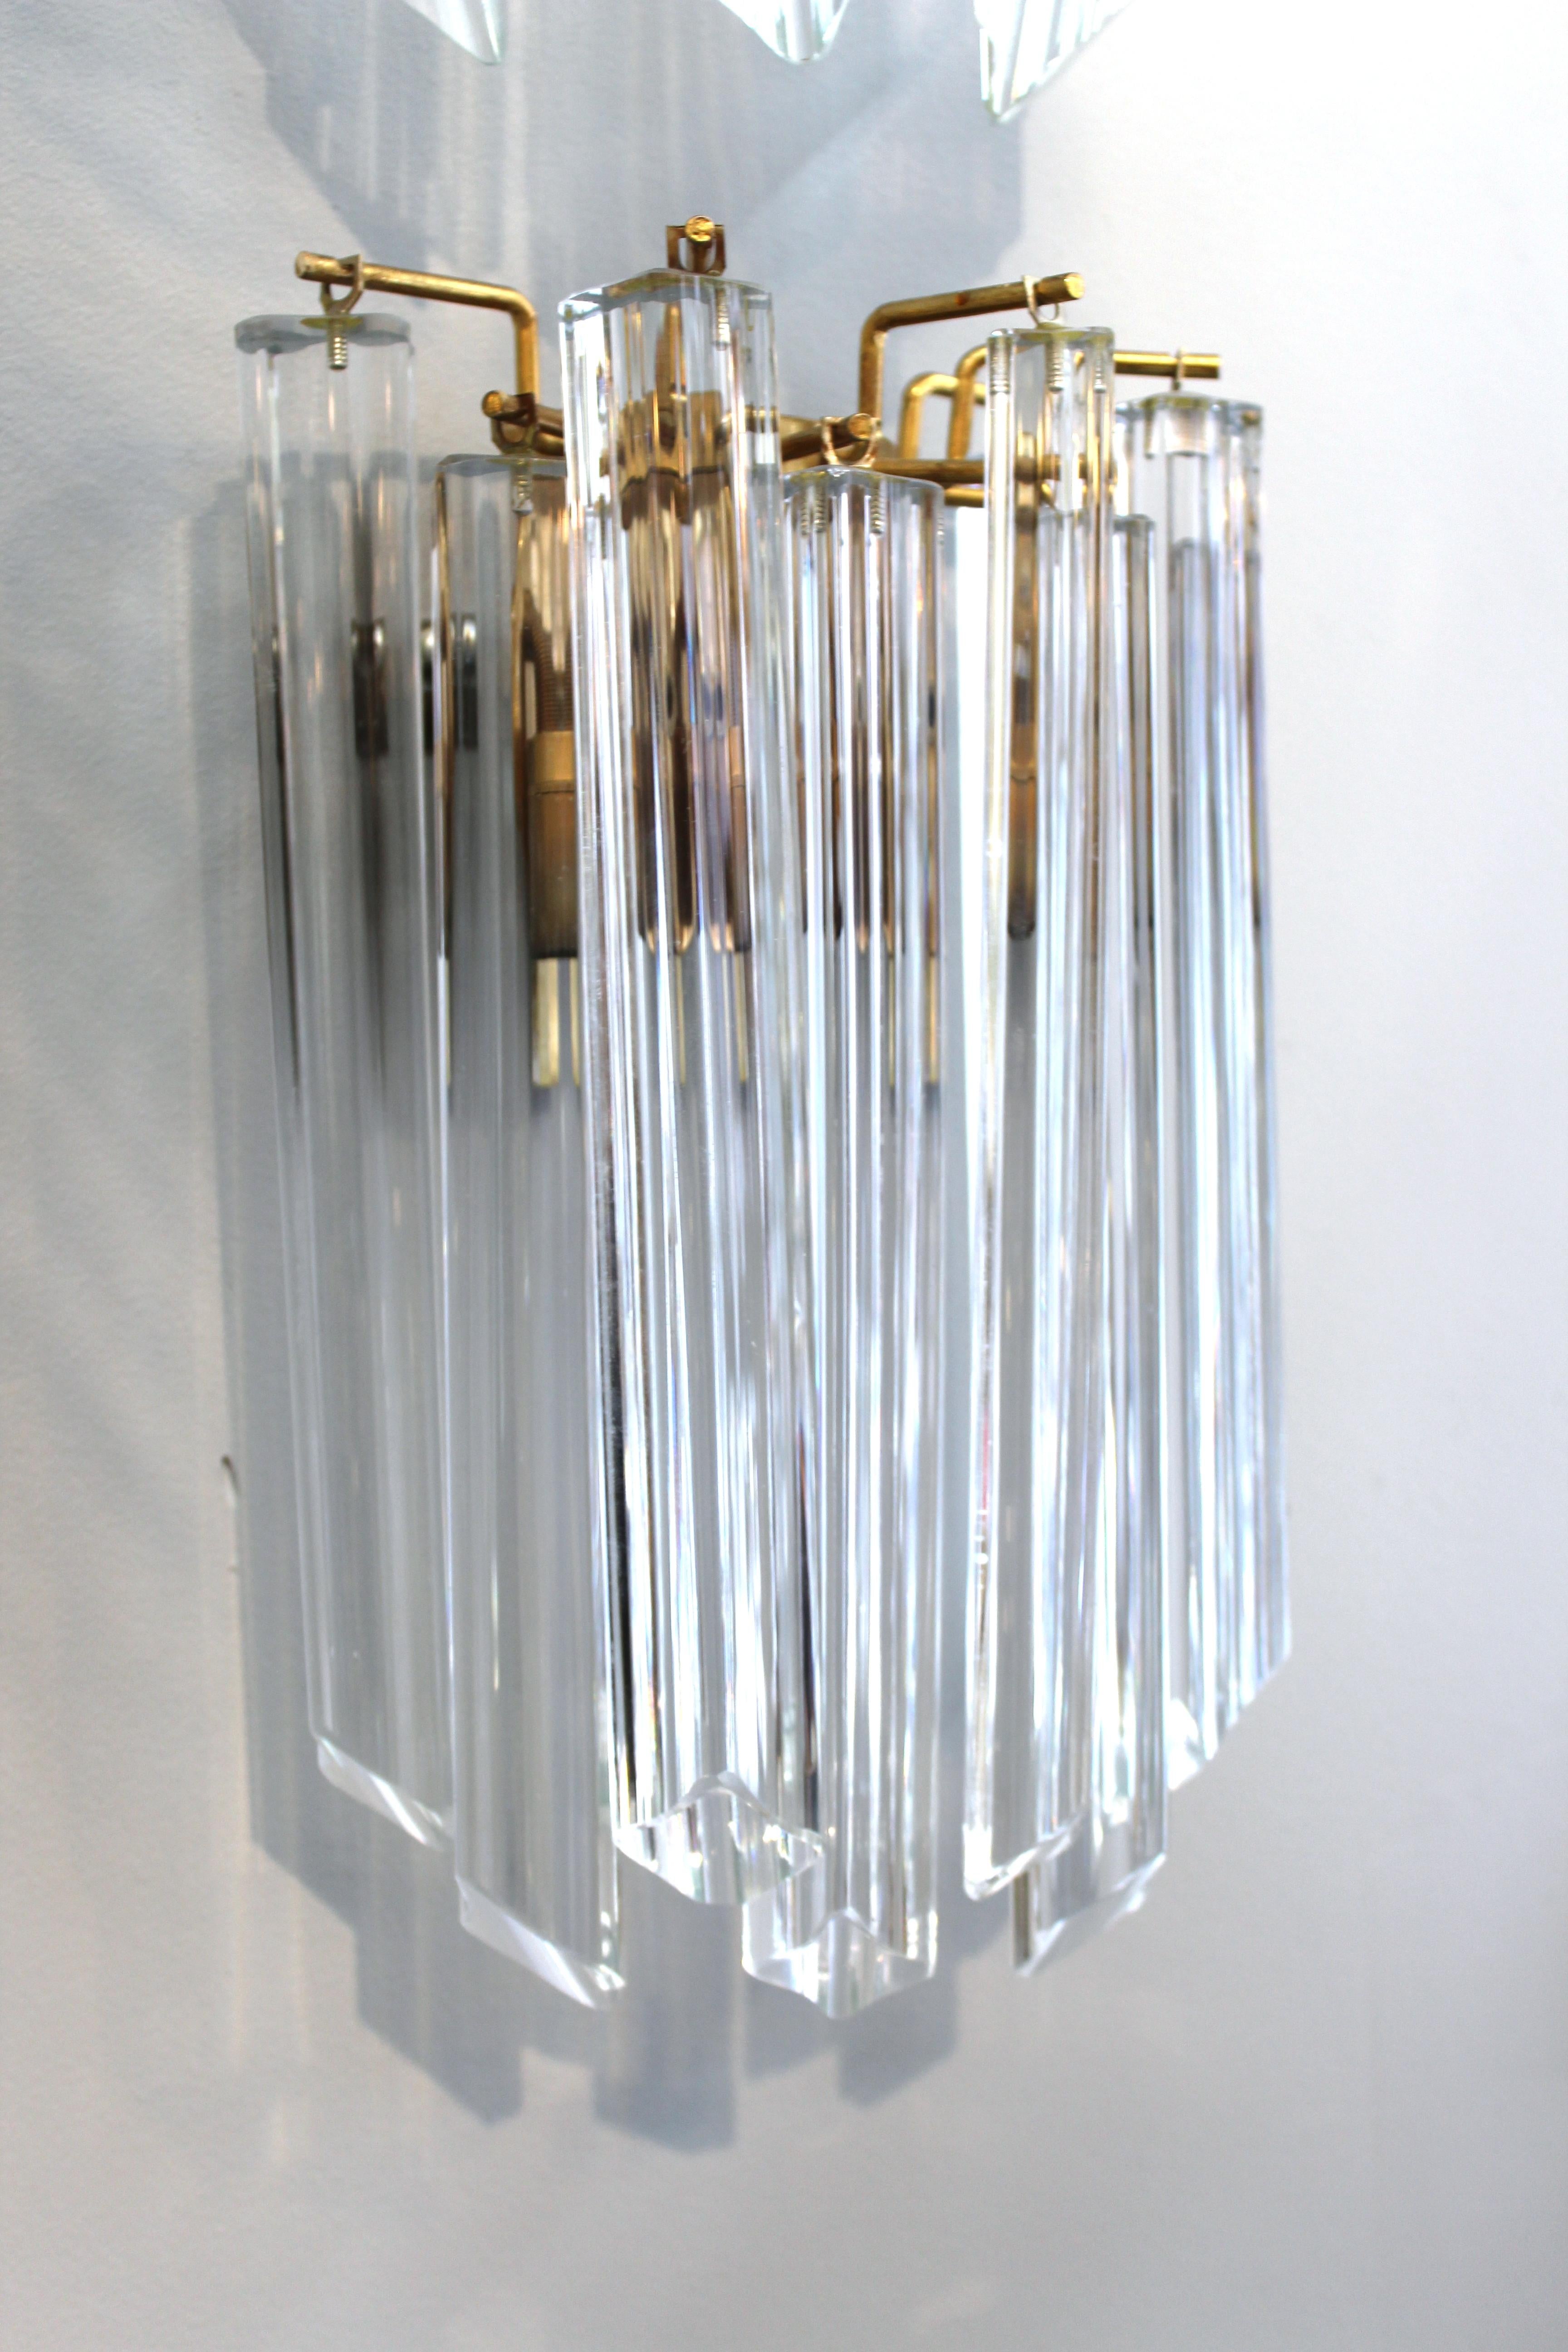 Pair of Italian Mid-Century Modern wall sconces with quadriedri prisms attached to a metal structure attributed to Venini. Each sconce can hold two light bulbs. A few minor chips to a couple of prisms and age-related tarnish to the metal.